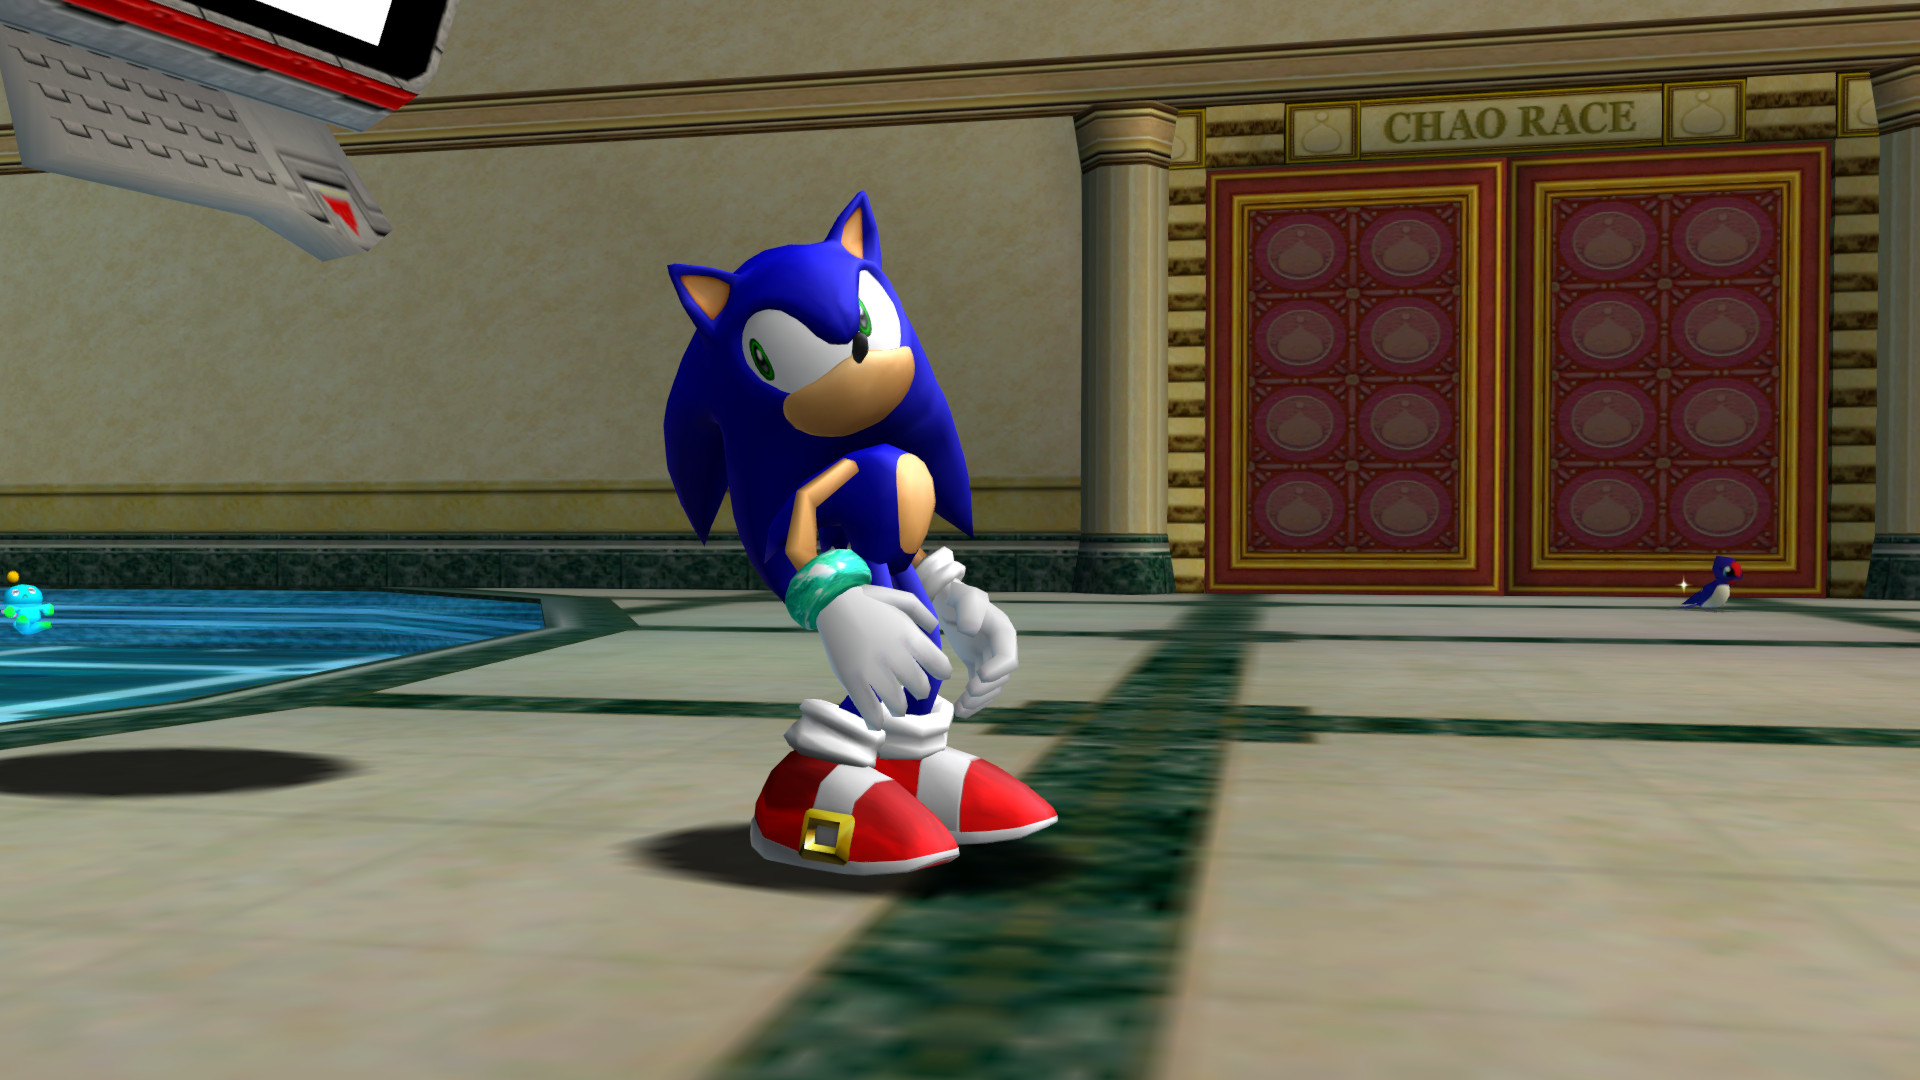 Classic Sonic From SSS [Sonic Adventure DX] [Mods]